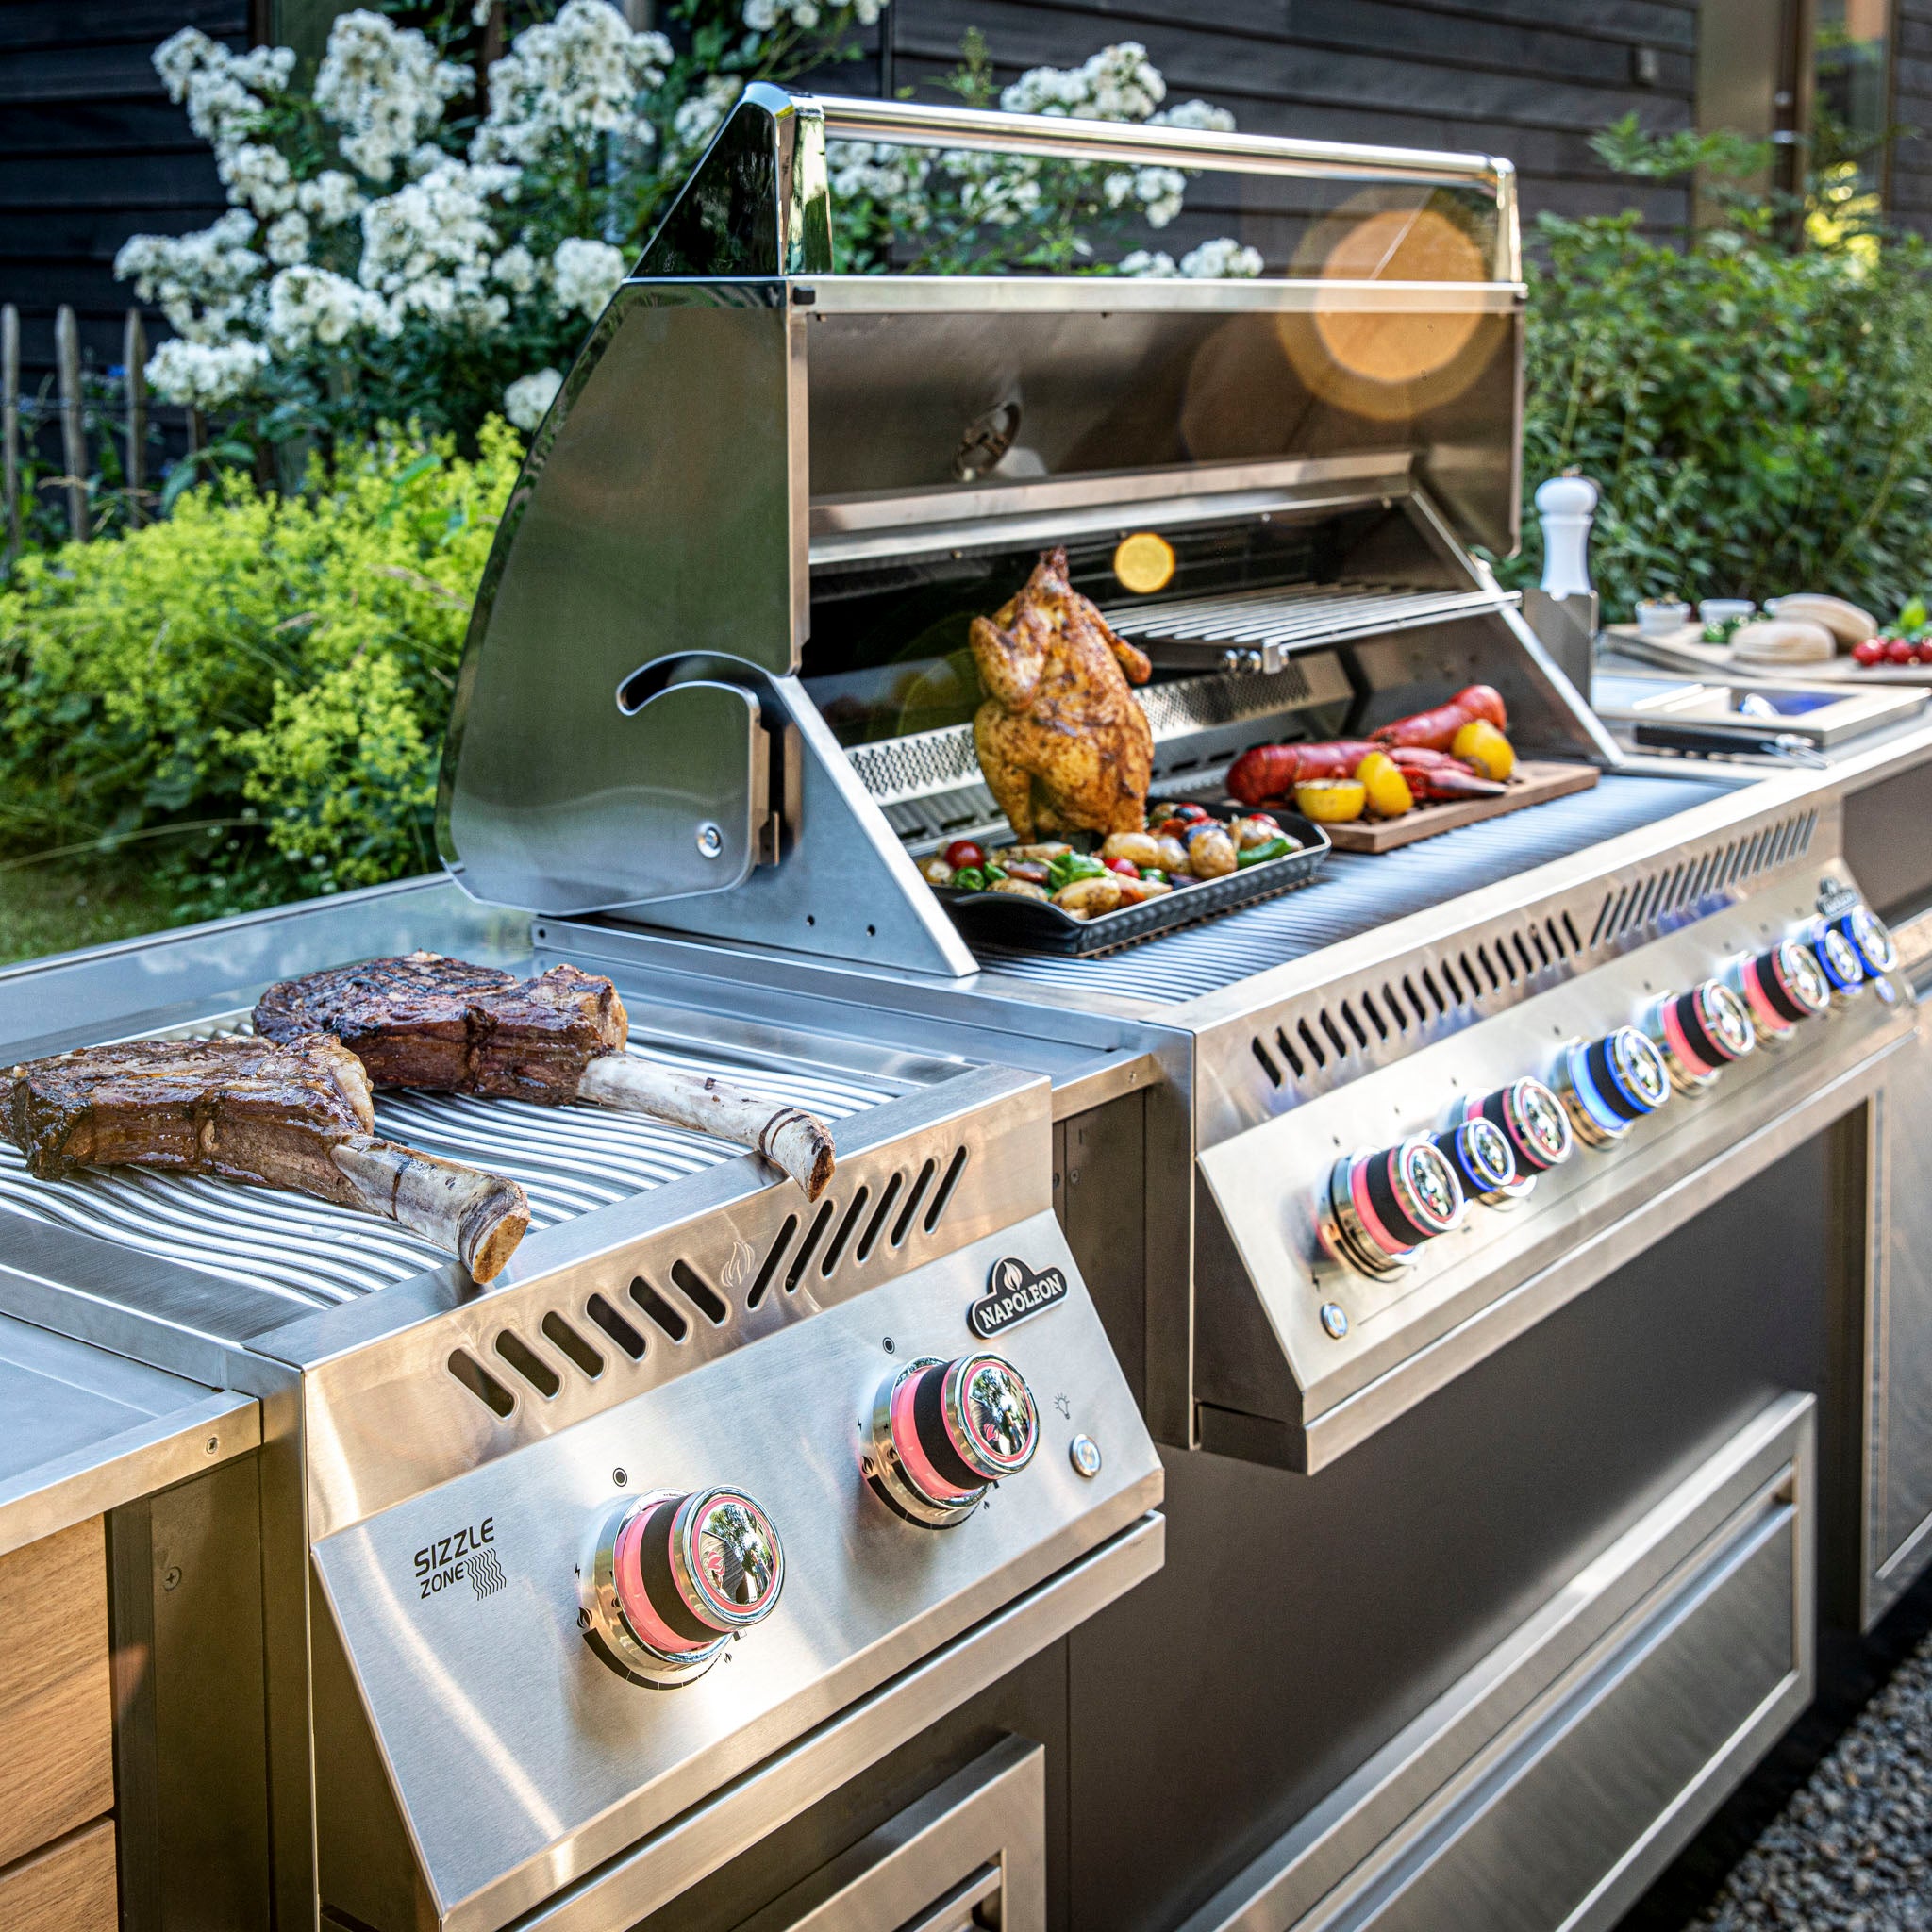 Napoleon 700 Series 44" Built-in Gas Grill